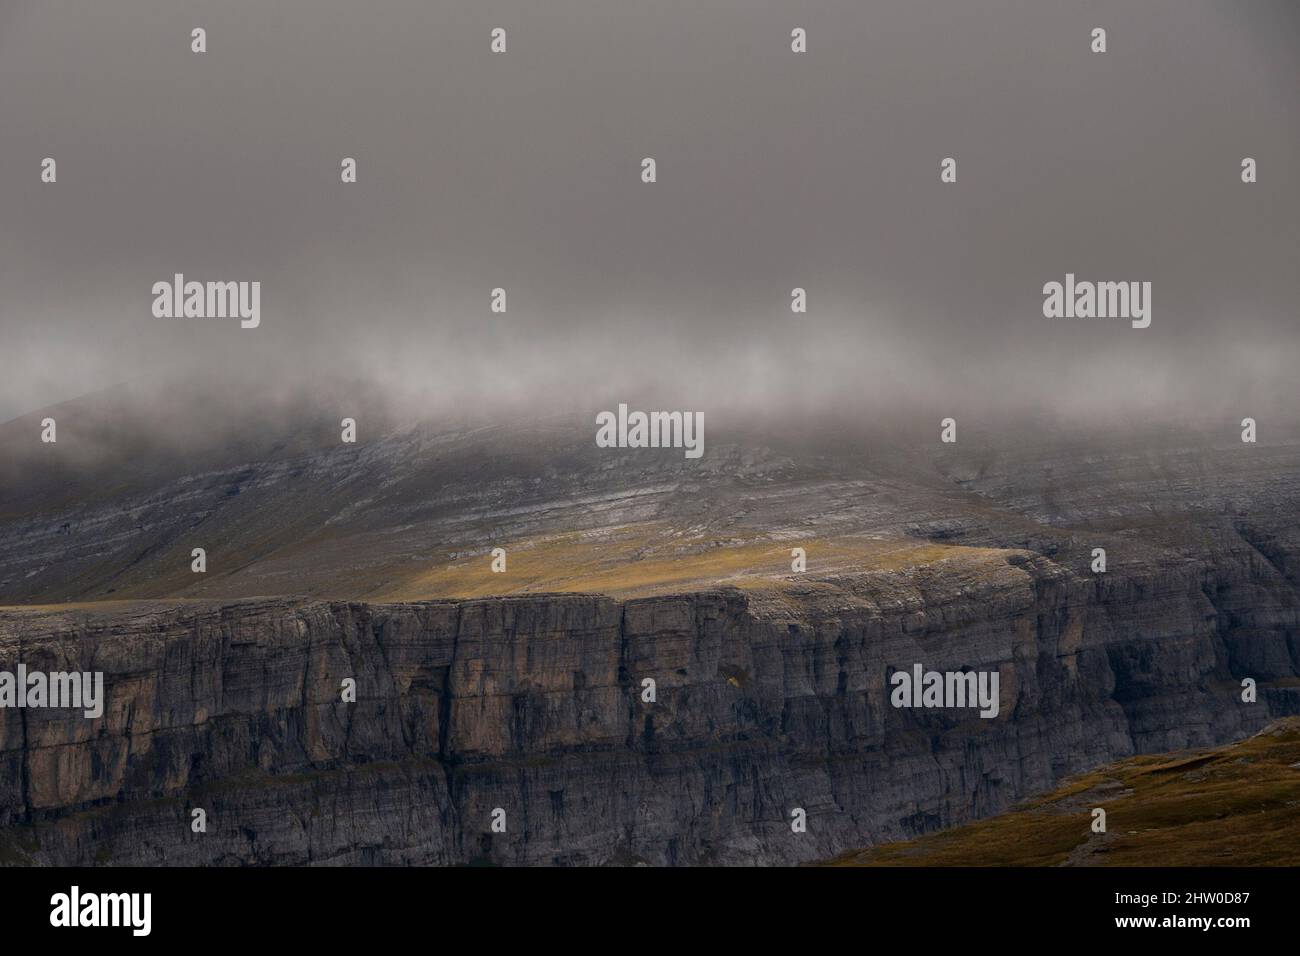 Abrupt grassy cliff slope in the mist of a dark stormy day Stock Photo